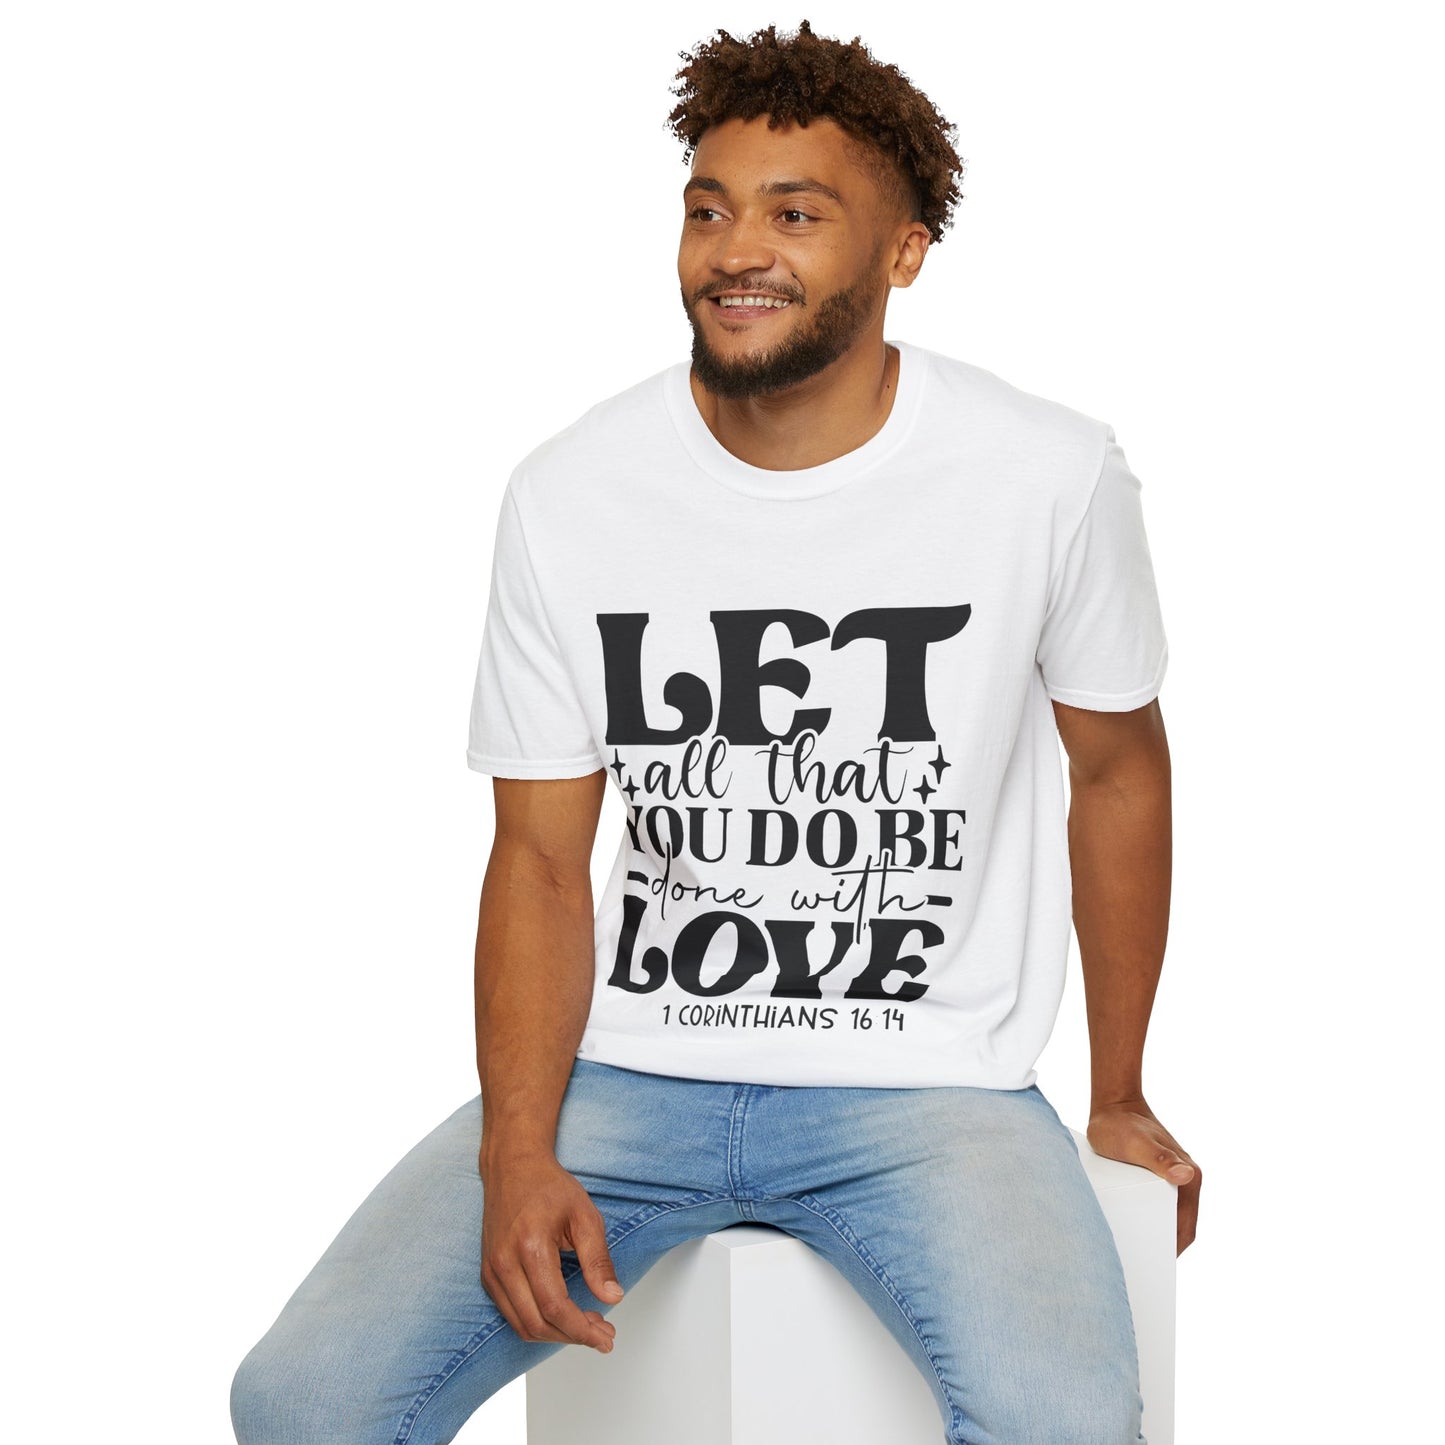 Let All That You Do Be Done With Love Corinthians 16 14 Triple Viking T-Shirt